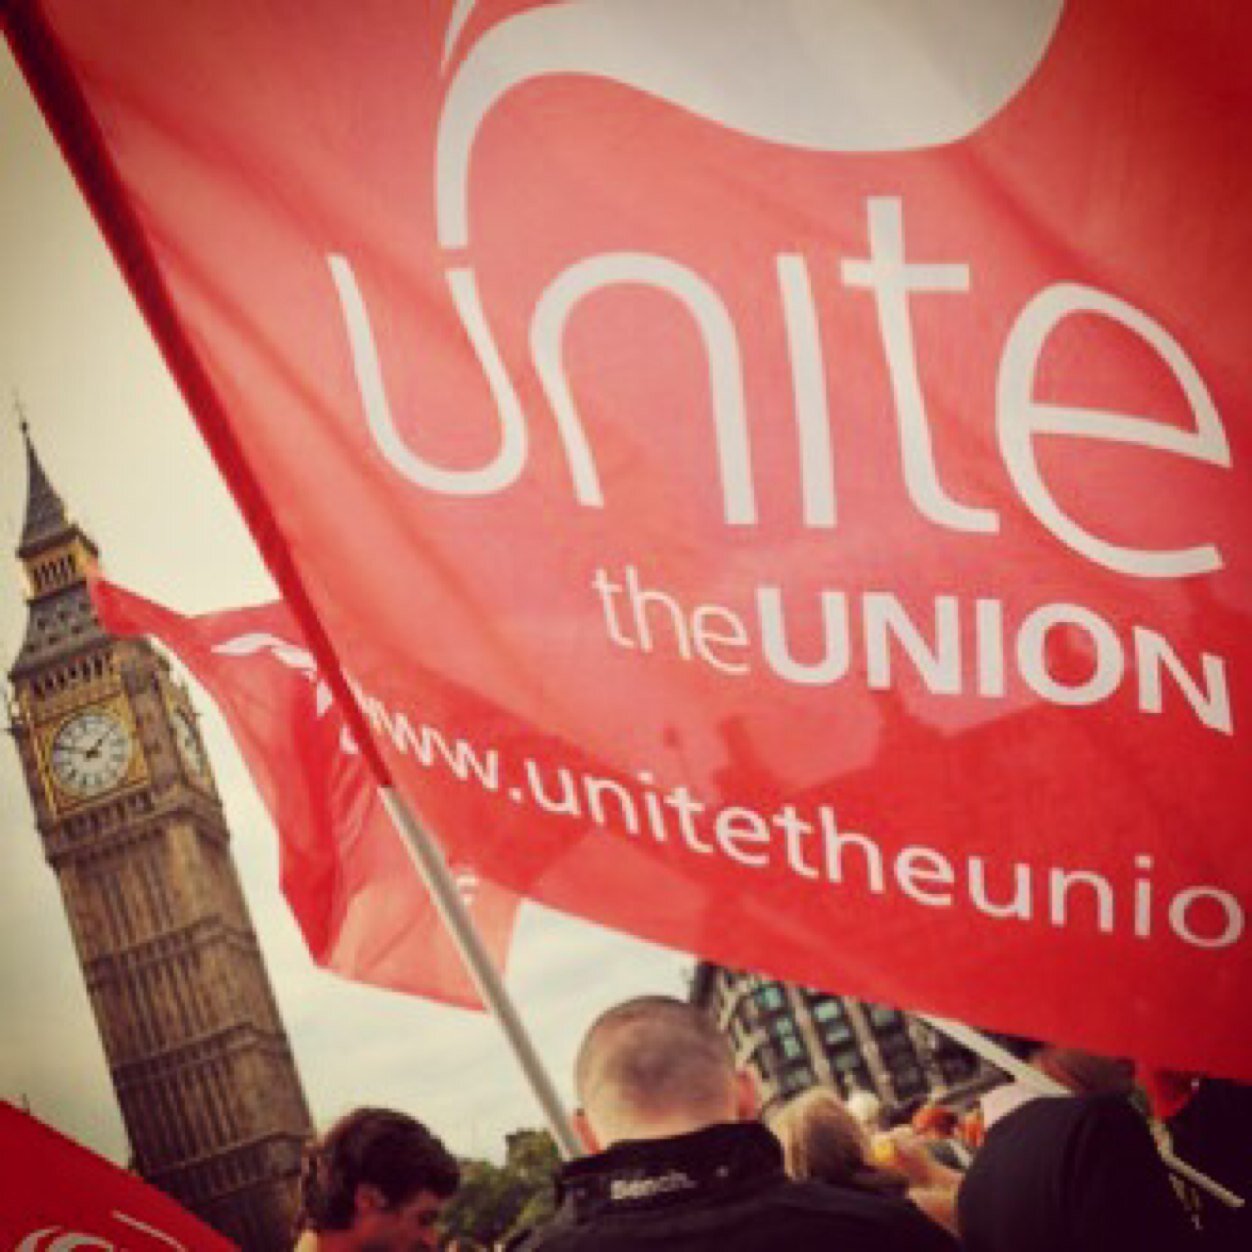 @unitetheunion Parliamentary and Constituency Staff Branch (LE/427) representing MPs' staff in the @HouseofCommons and constituency offices since 1983.